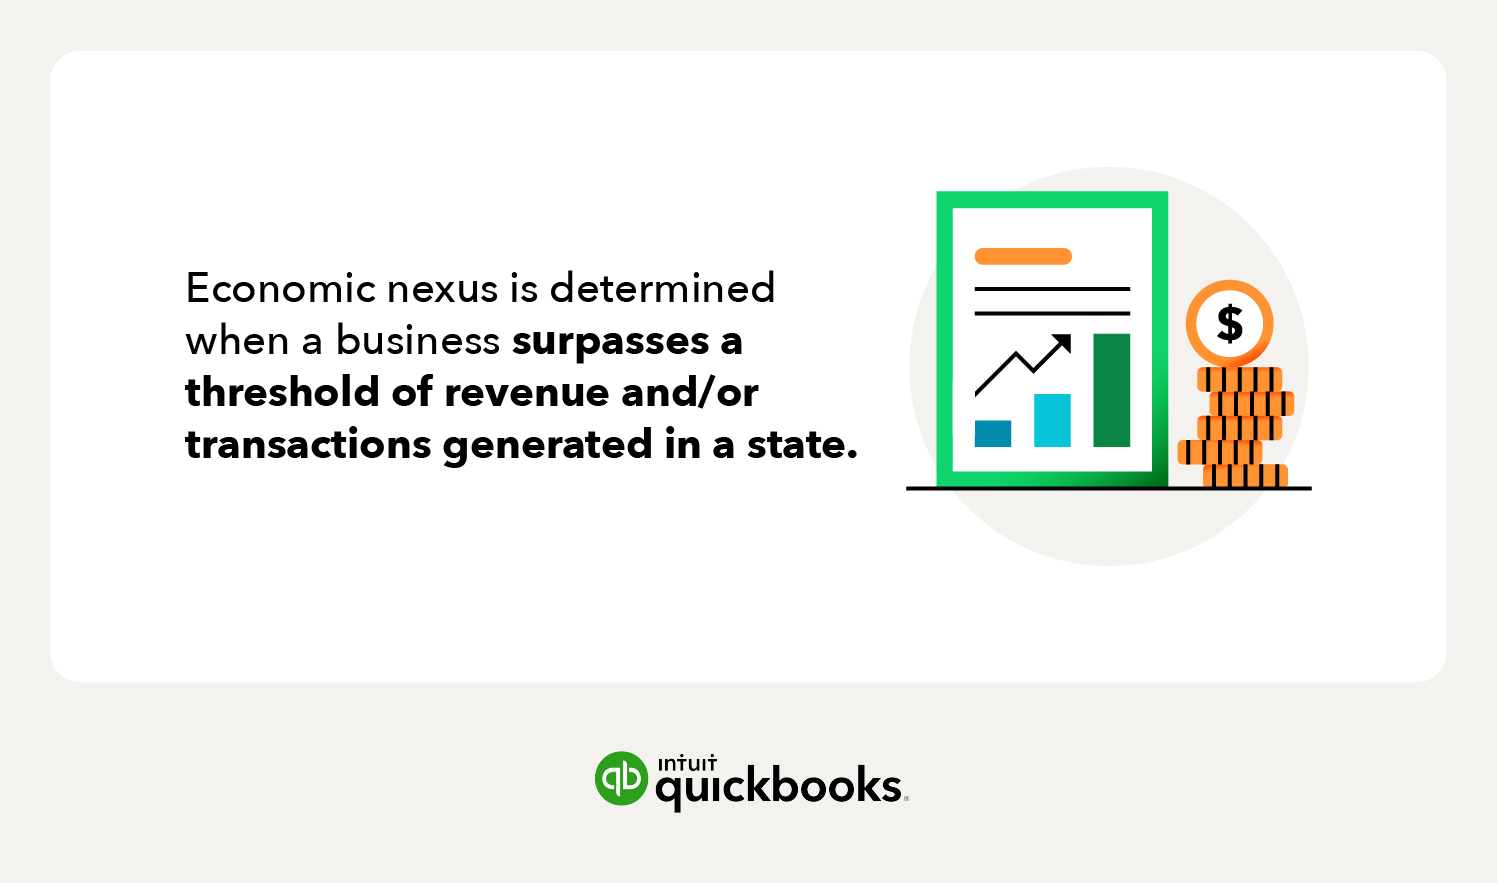 Economic nexus is determined when a business surpasses a threshold of revenue and/or transactions generated in the state.